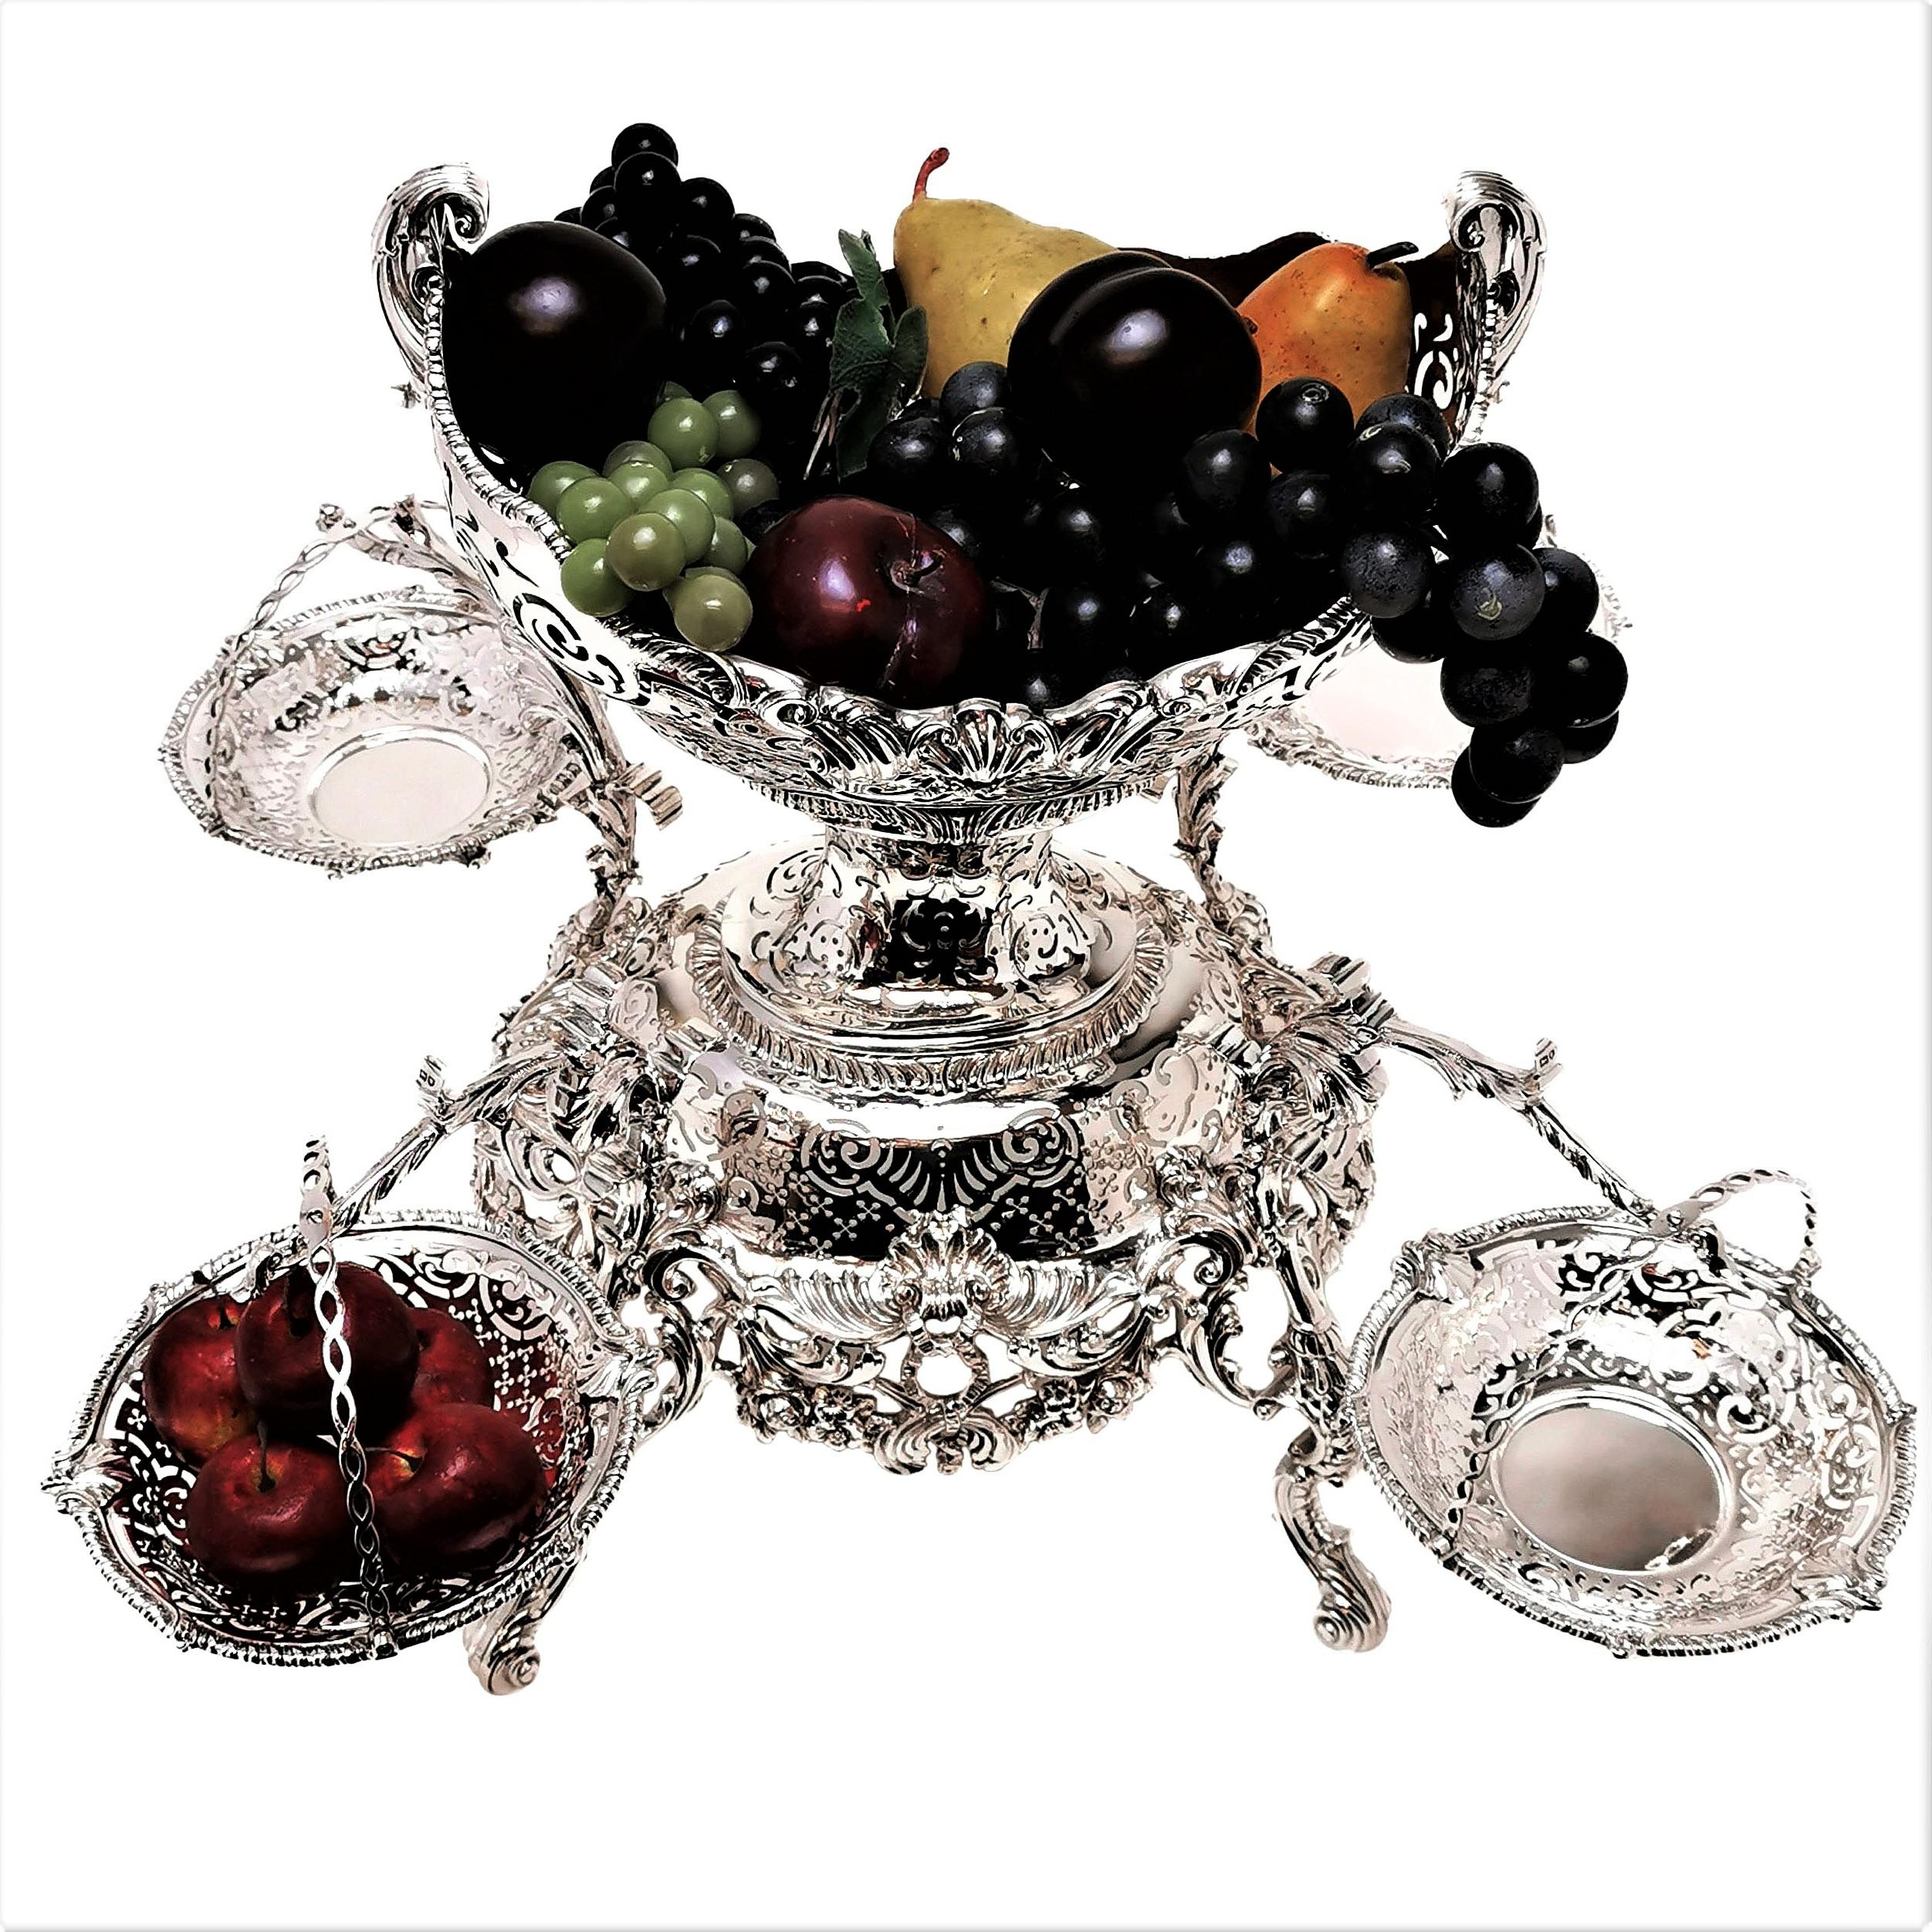 A magnificent Antique sterling Silver Epergne crafted to an excellent standard in the style of a George III c. 1765 style Centrepiece. This Silver Centrepiece features a large central basket and four smaller hanging baskets. The Silver Baskets can